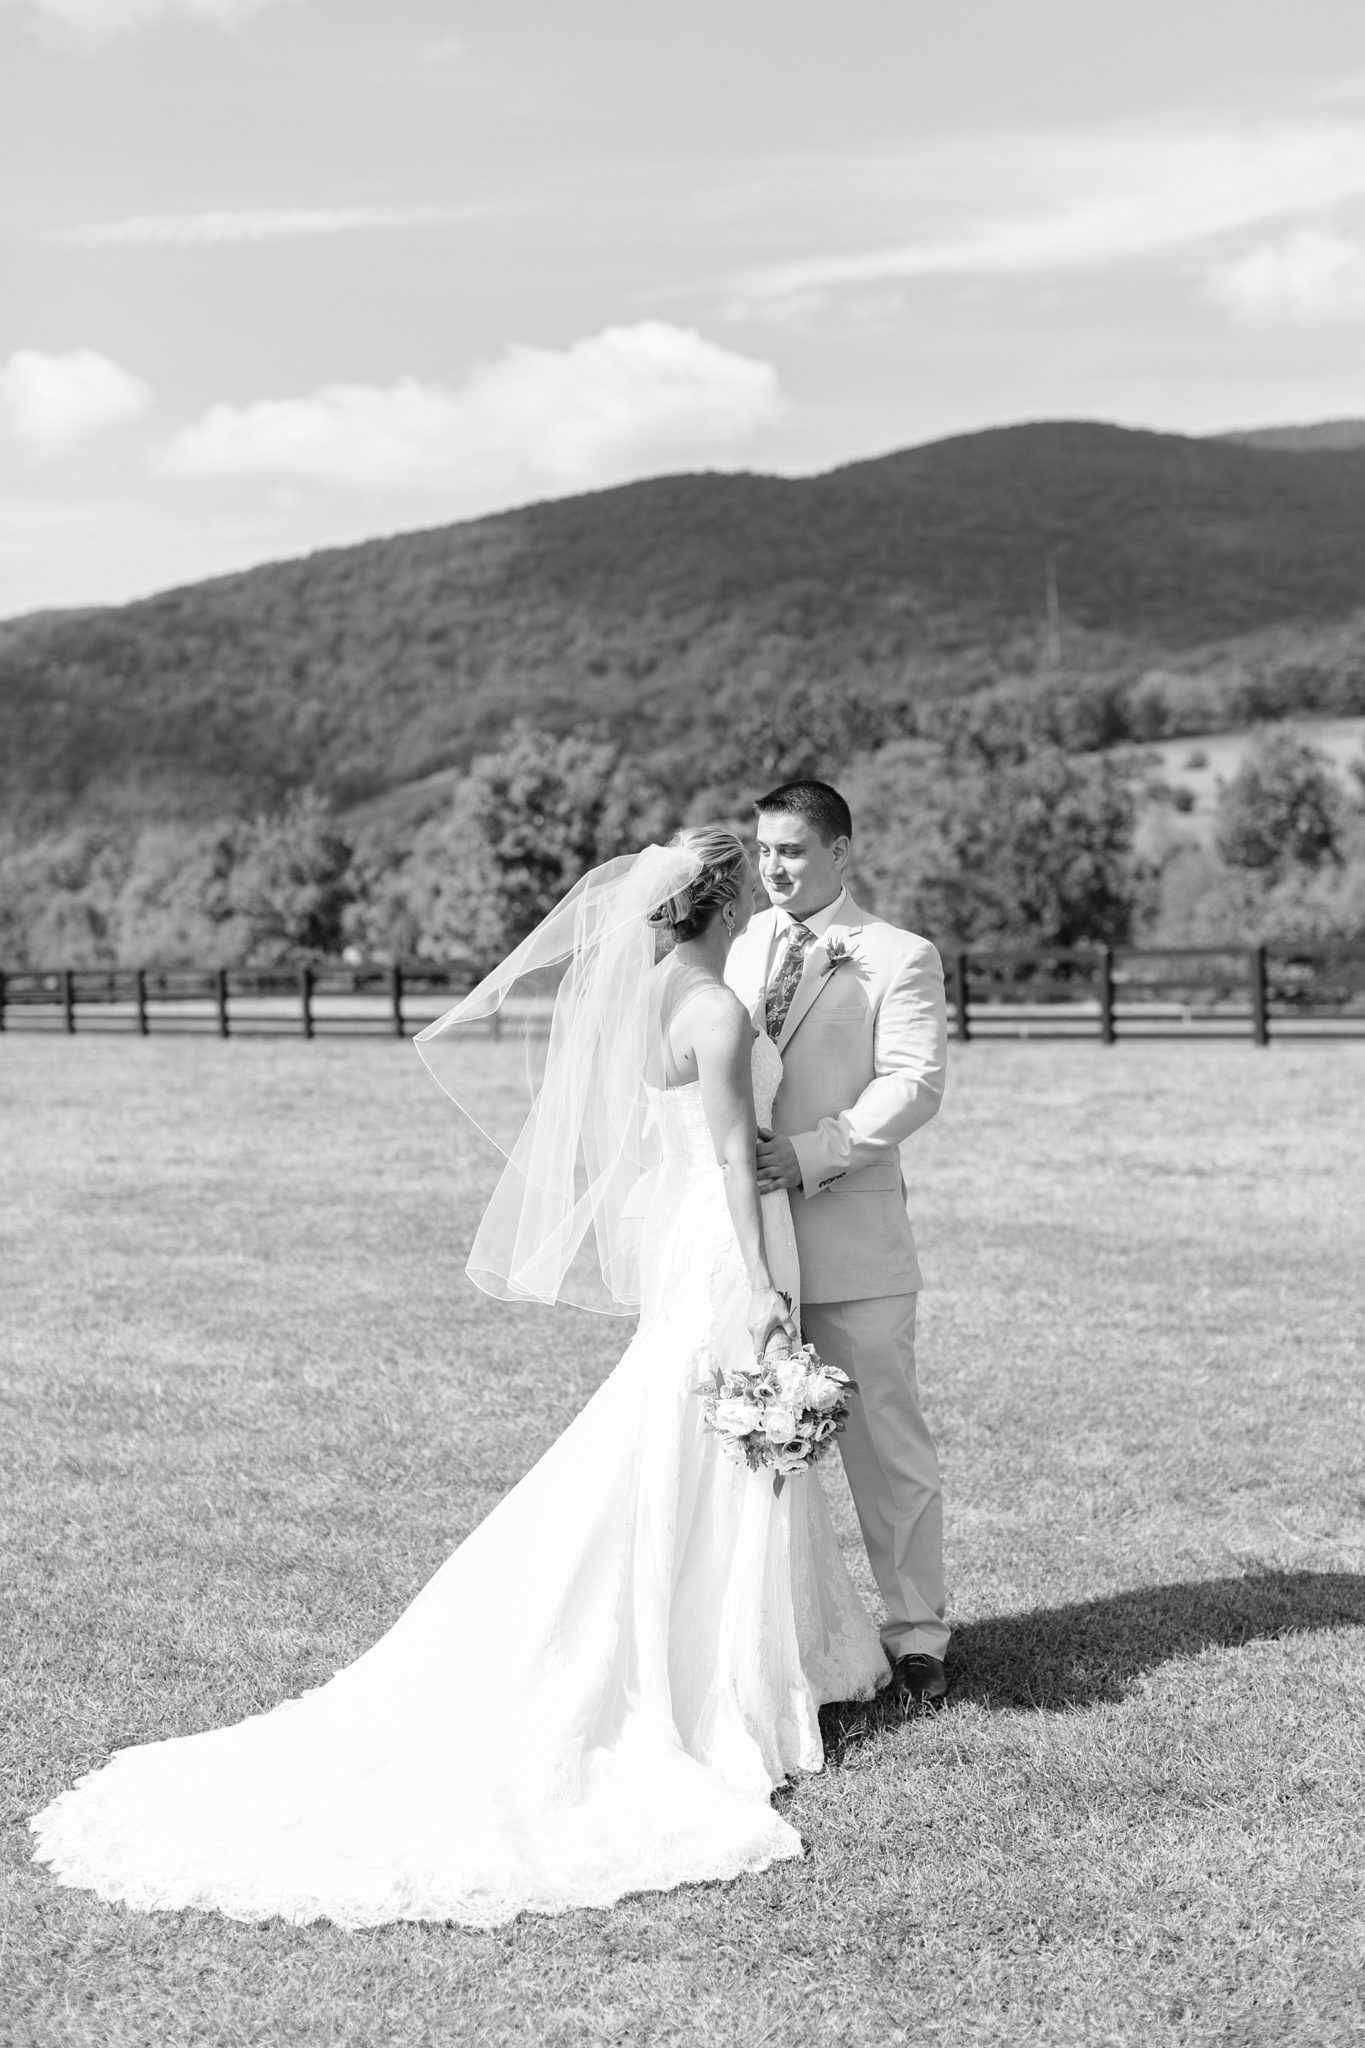 A gorgeous wedding featuring stunning landscapes at King Family Vineyard in Charlottesville, VA -- photographed by Alicia Lacey Photography, a Washington DC wedding photographer.